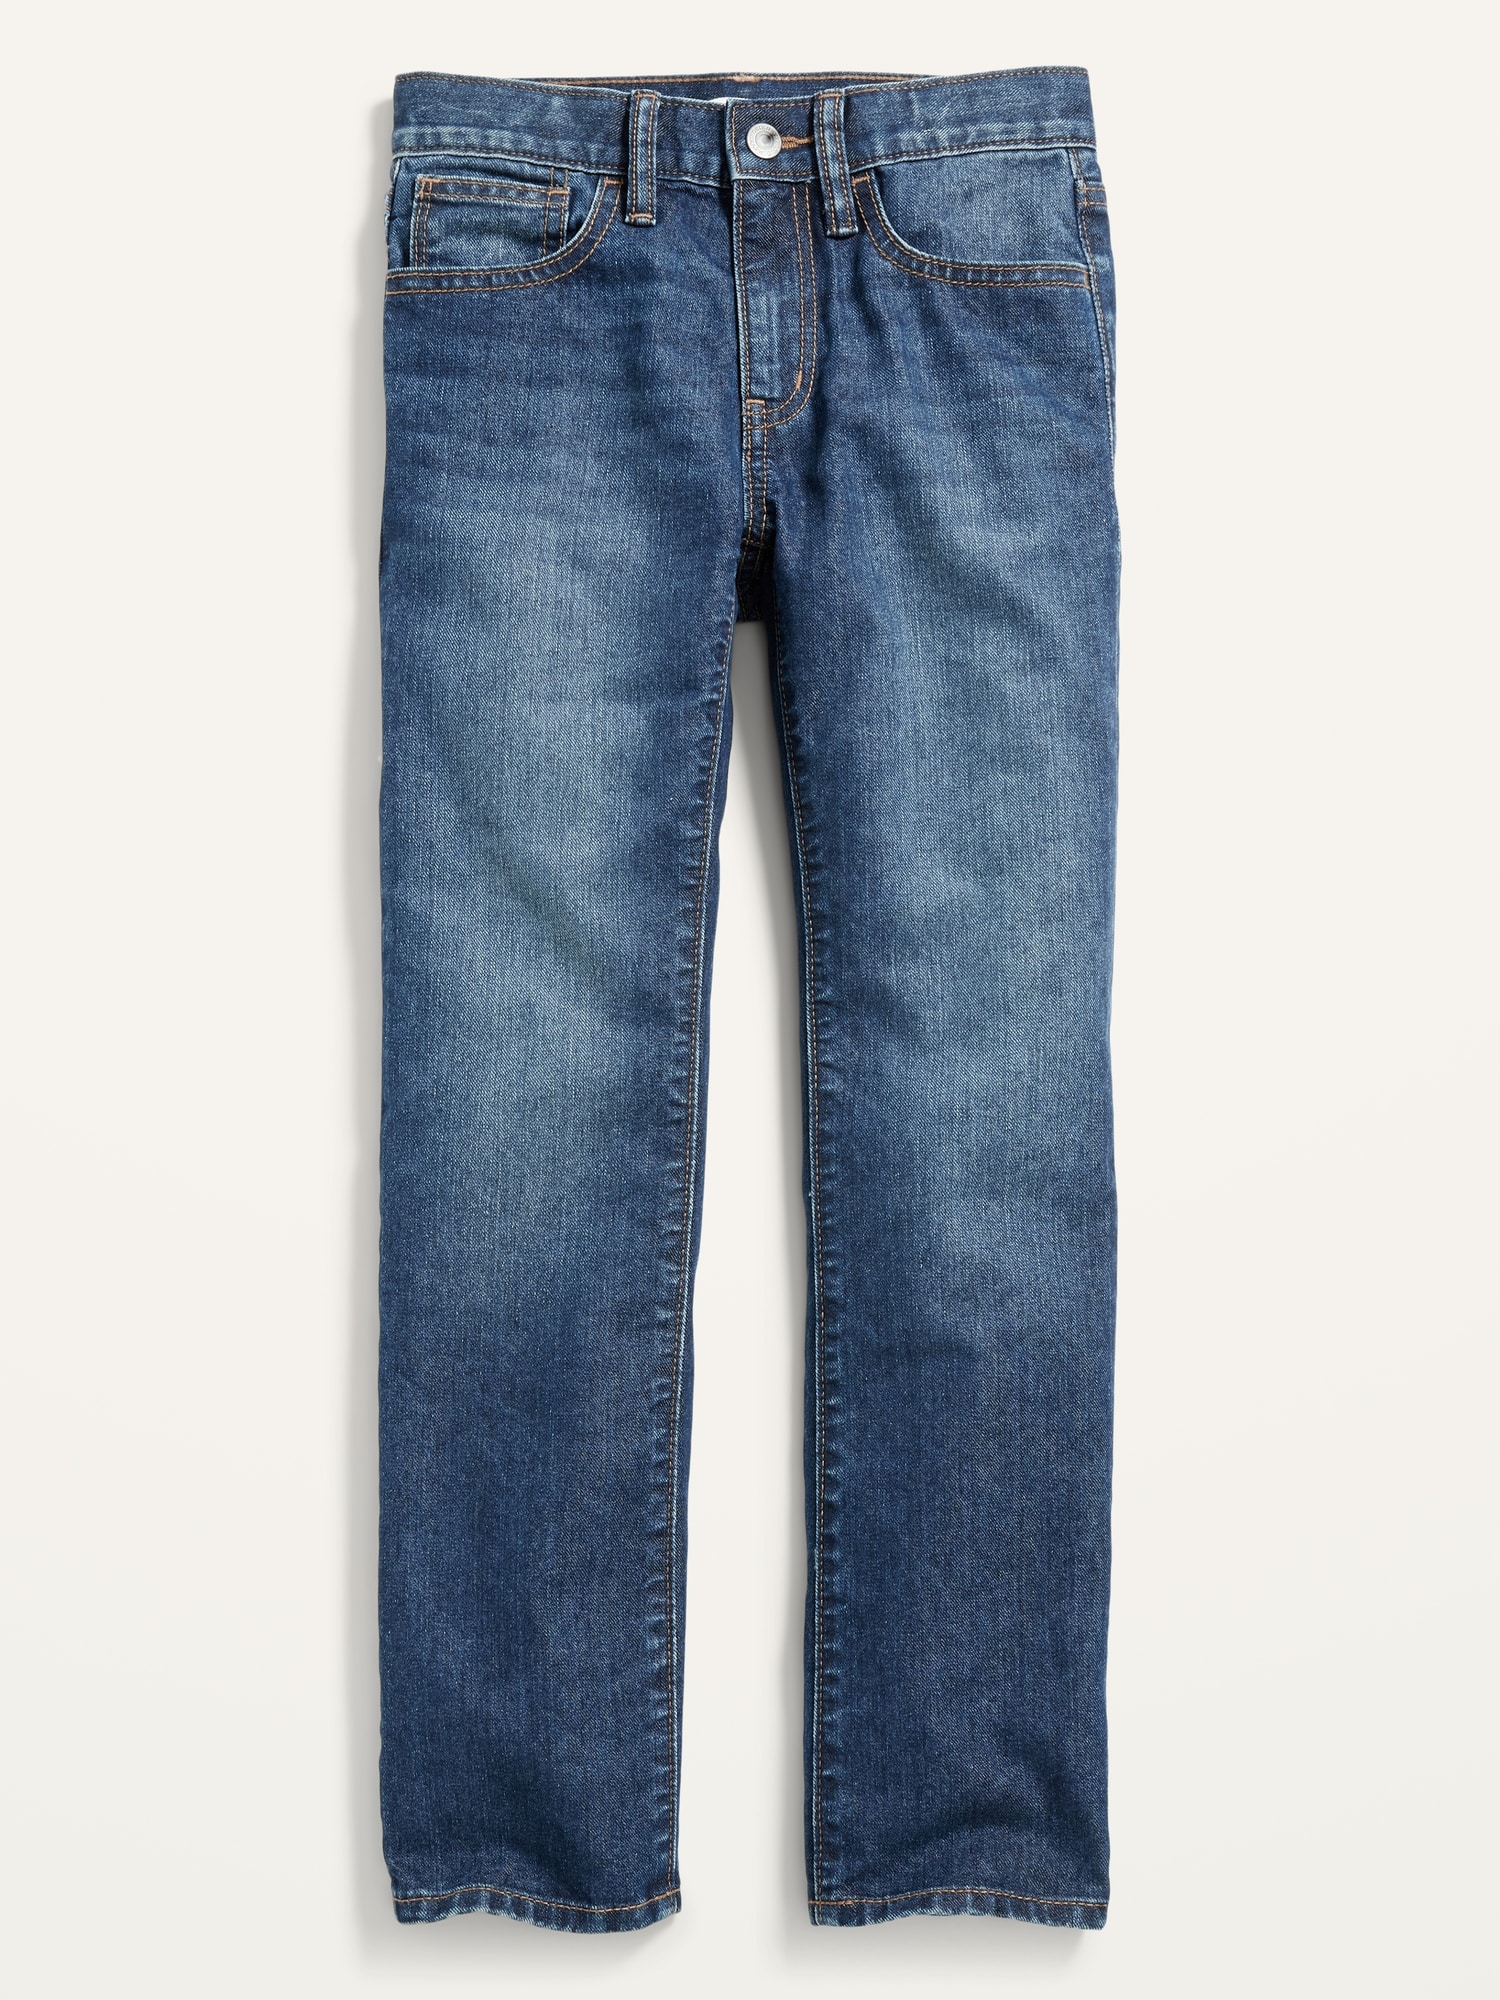 Relaxed Straight Non-Stretch Jeans for Boys